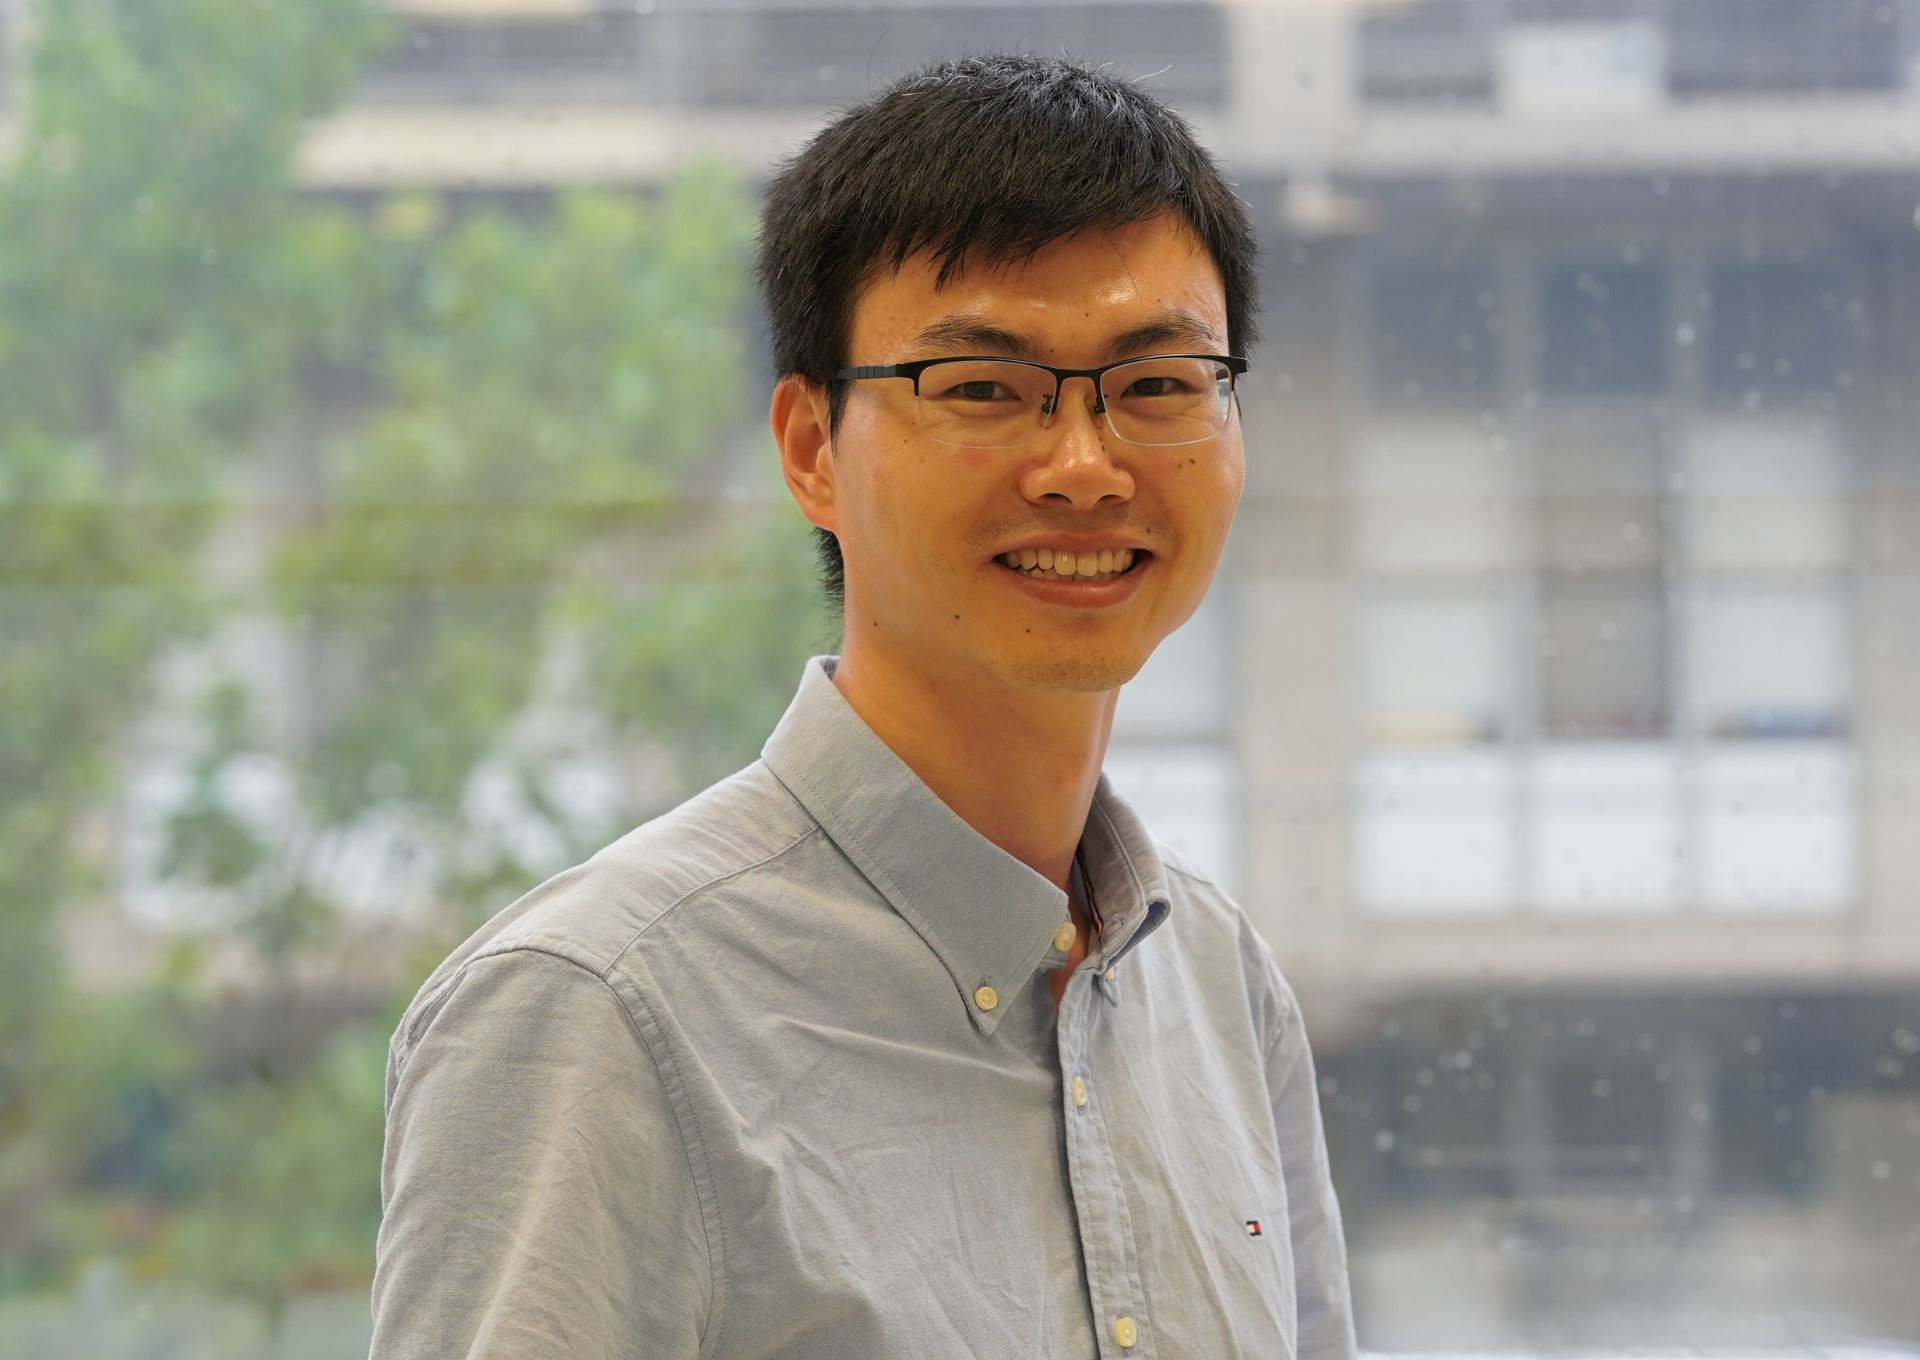 Dr Huan Liao standing against a window in a Florey laboratory. He wears a blue collared shirt and glasses.